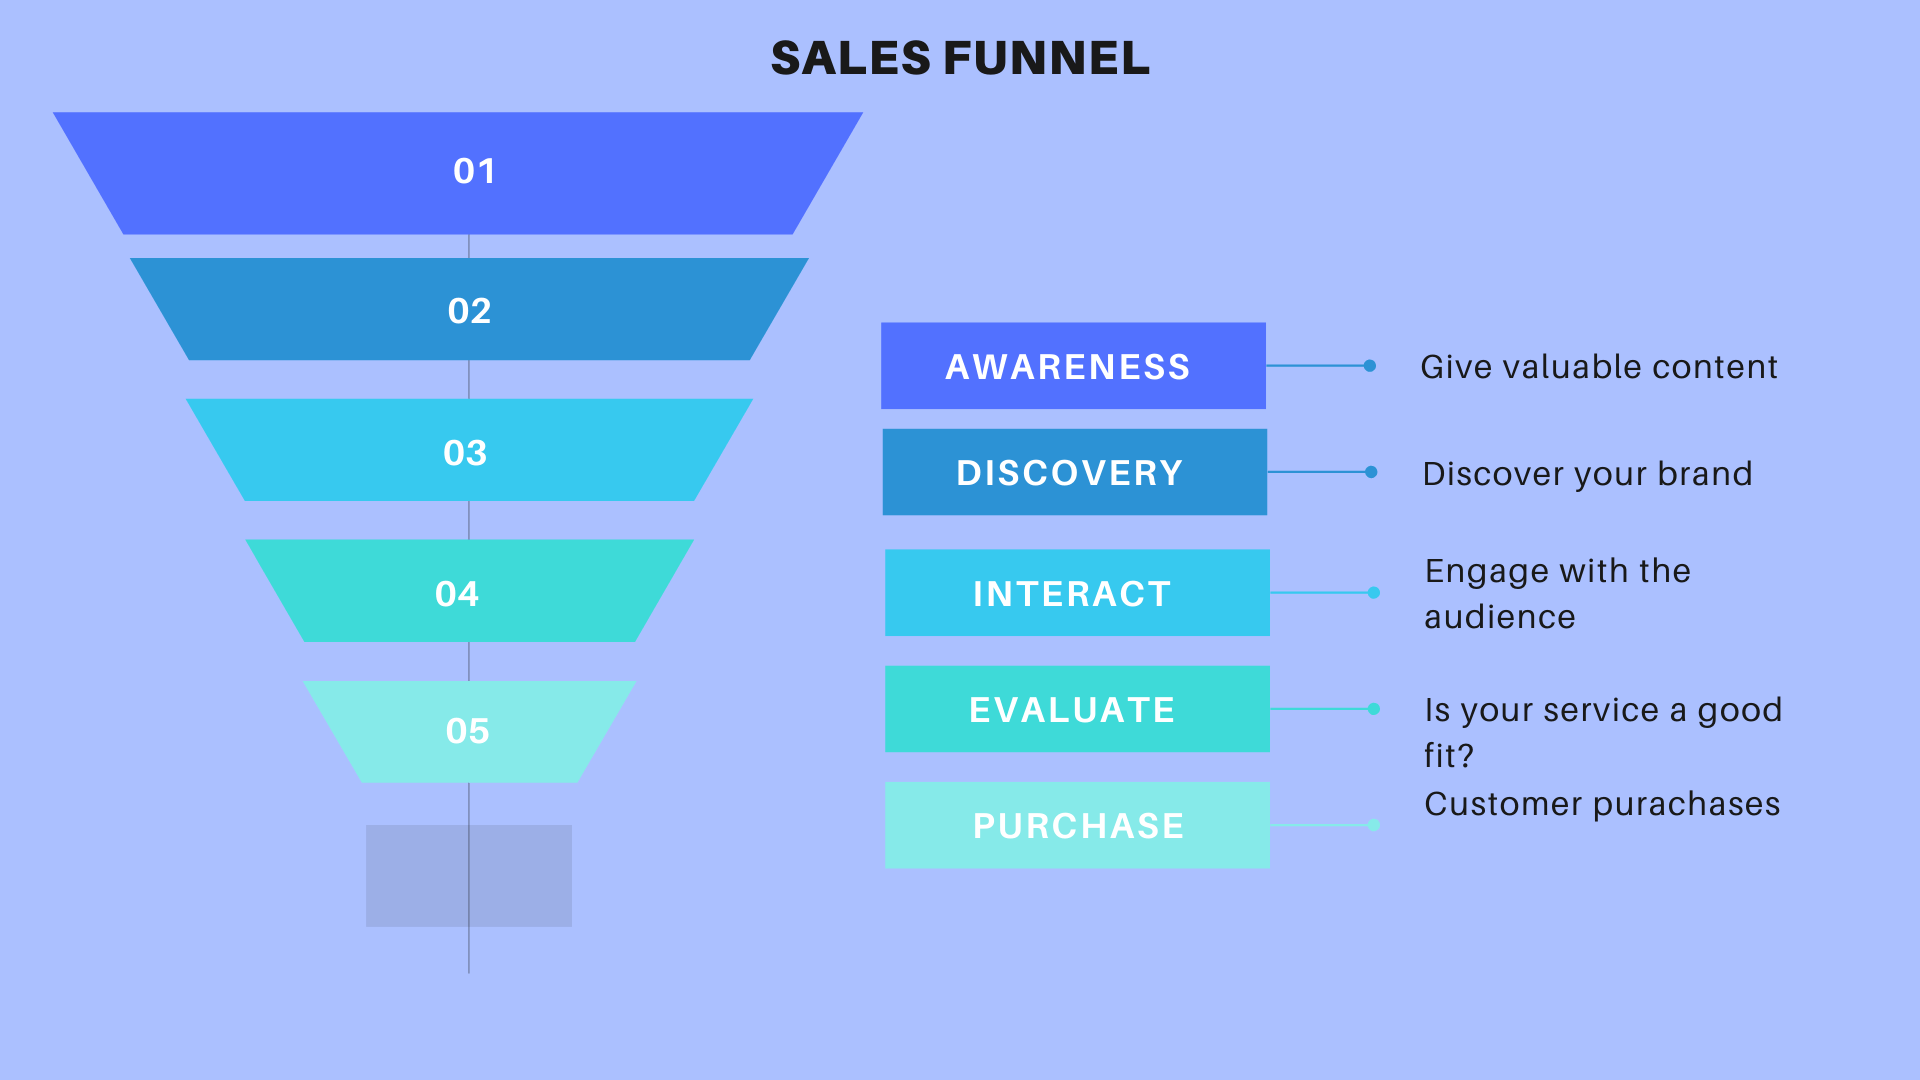 ResultFlow Review - SalesFunnel